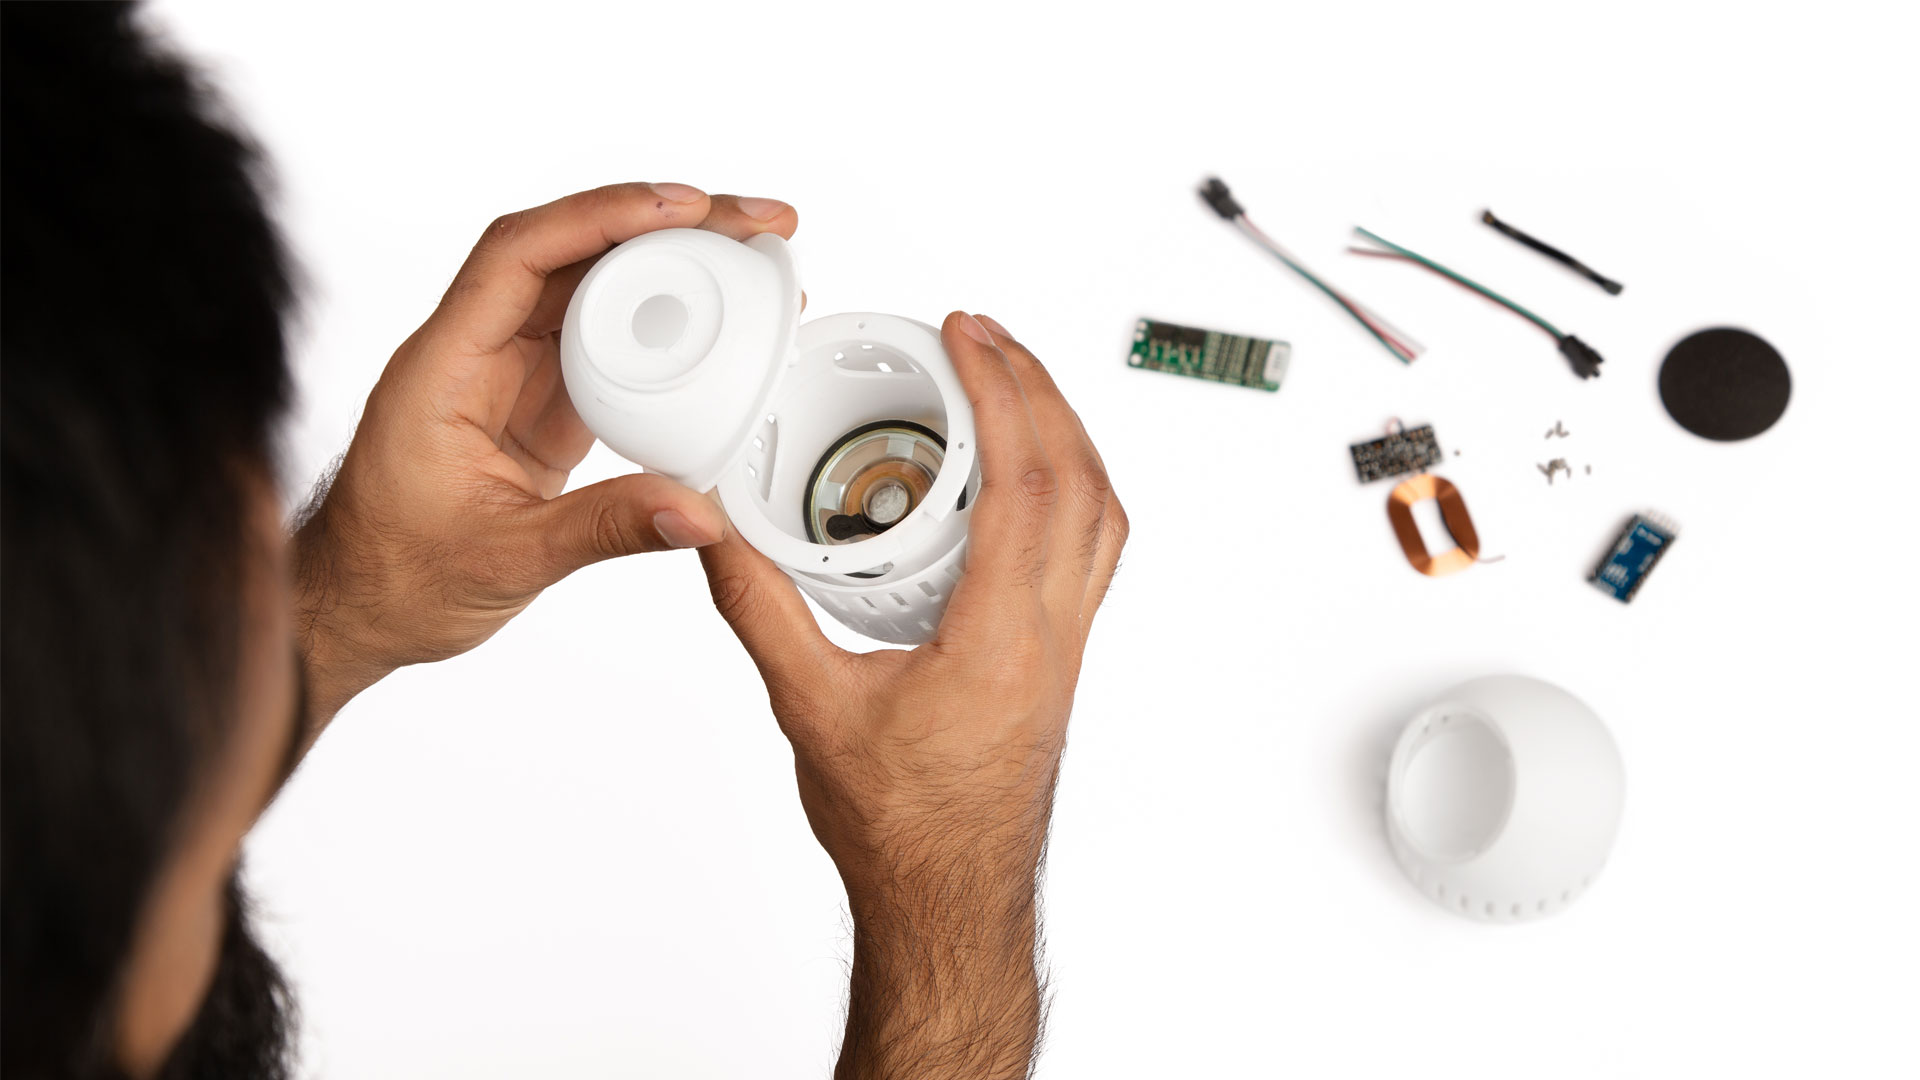 Gloo prototyping and manufacturing of smart speaker